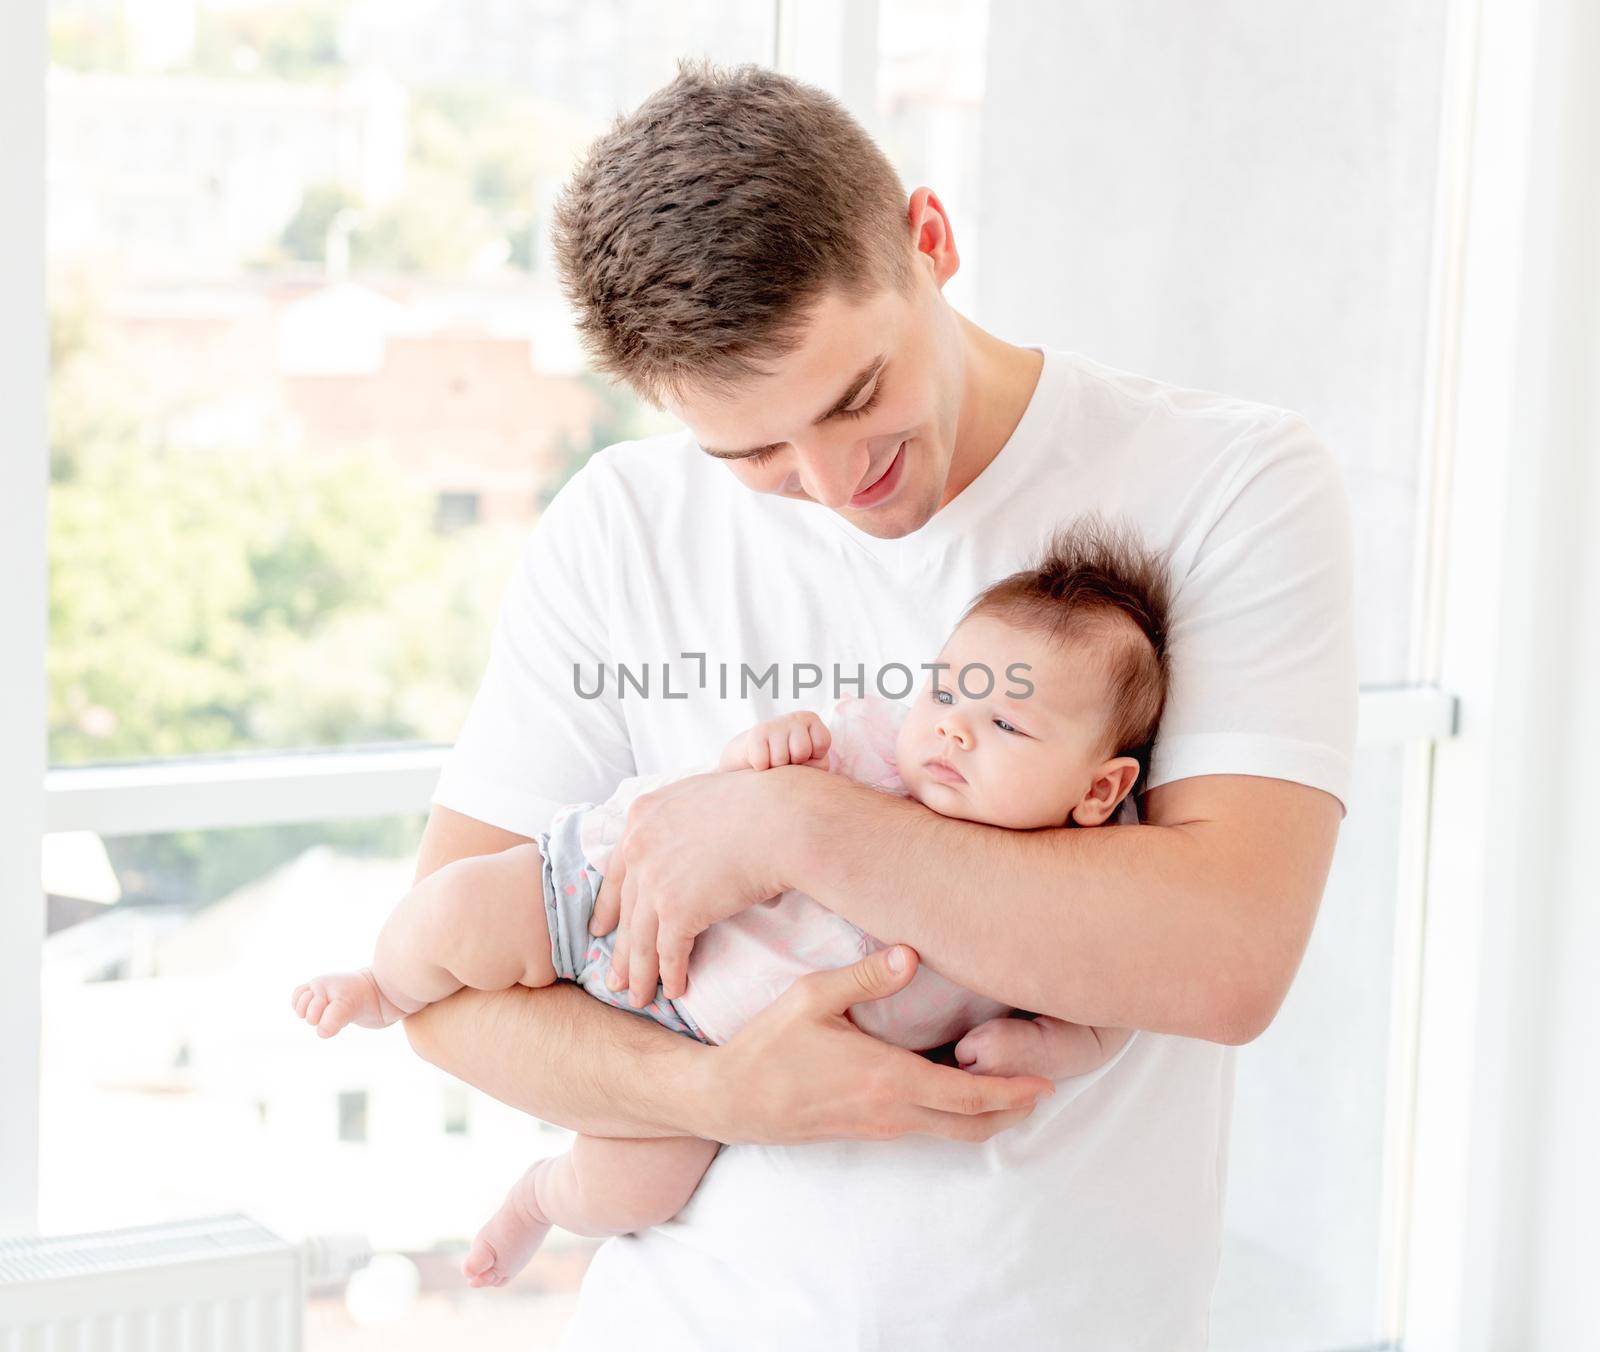 Father embracing infant near window